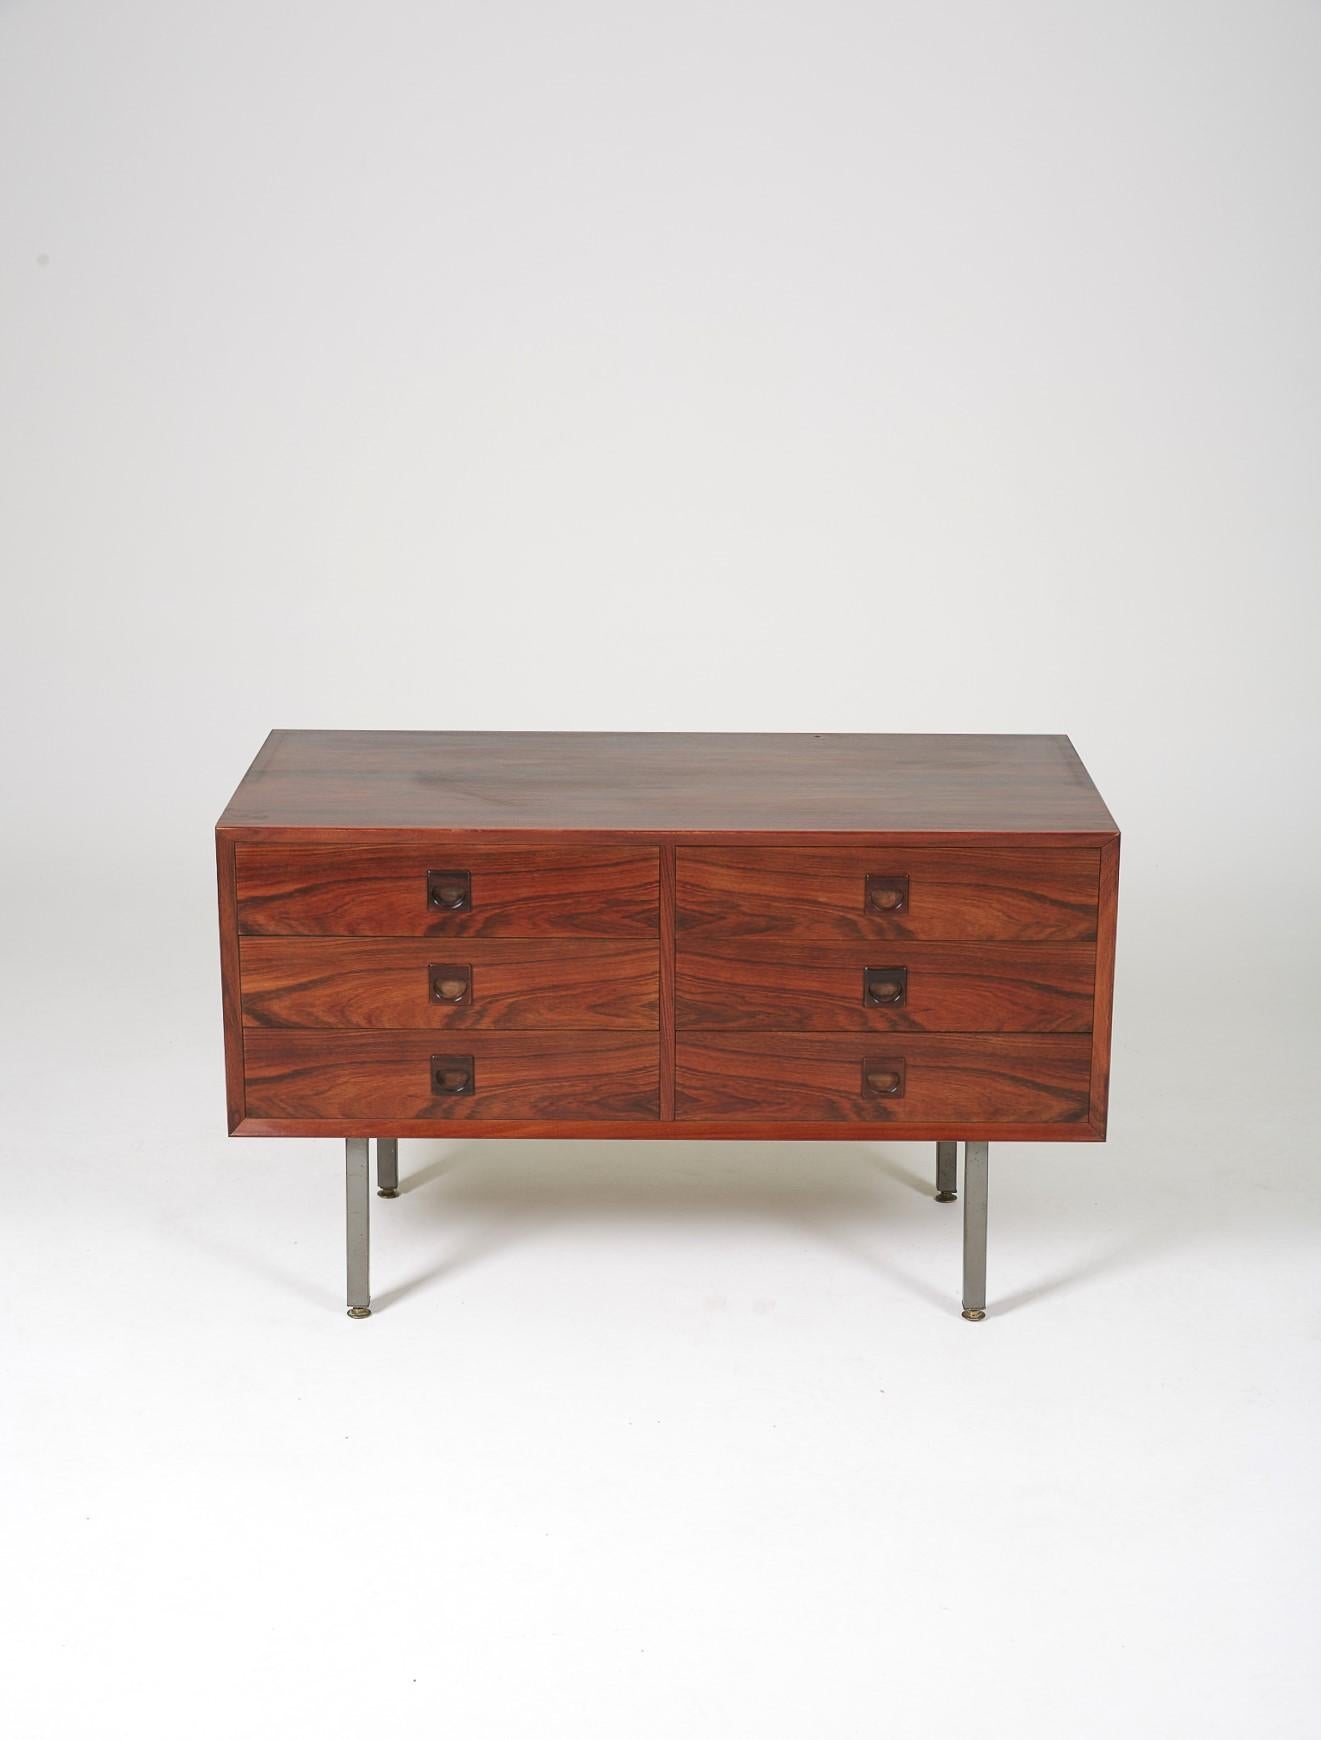 Sideboard by Erik Brouer for Mobelfabrik in the 60s. Structure in rosewood and metal base. Composed of two columns of three drawers. Good condition with some traces of use on the top.